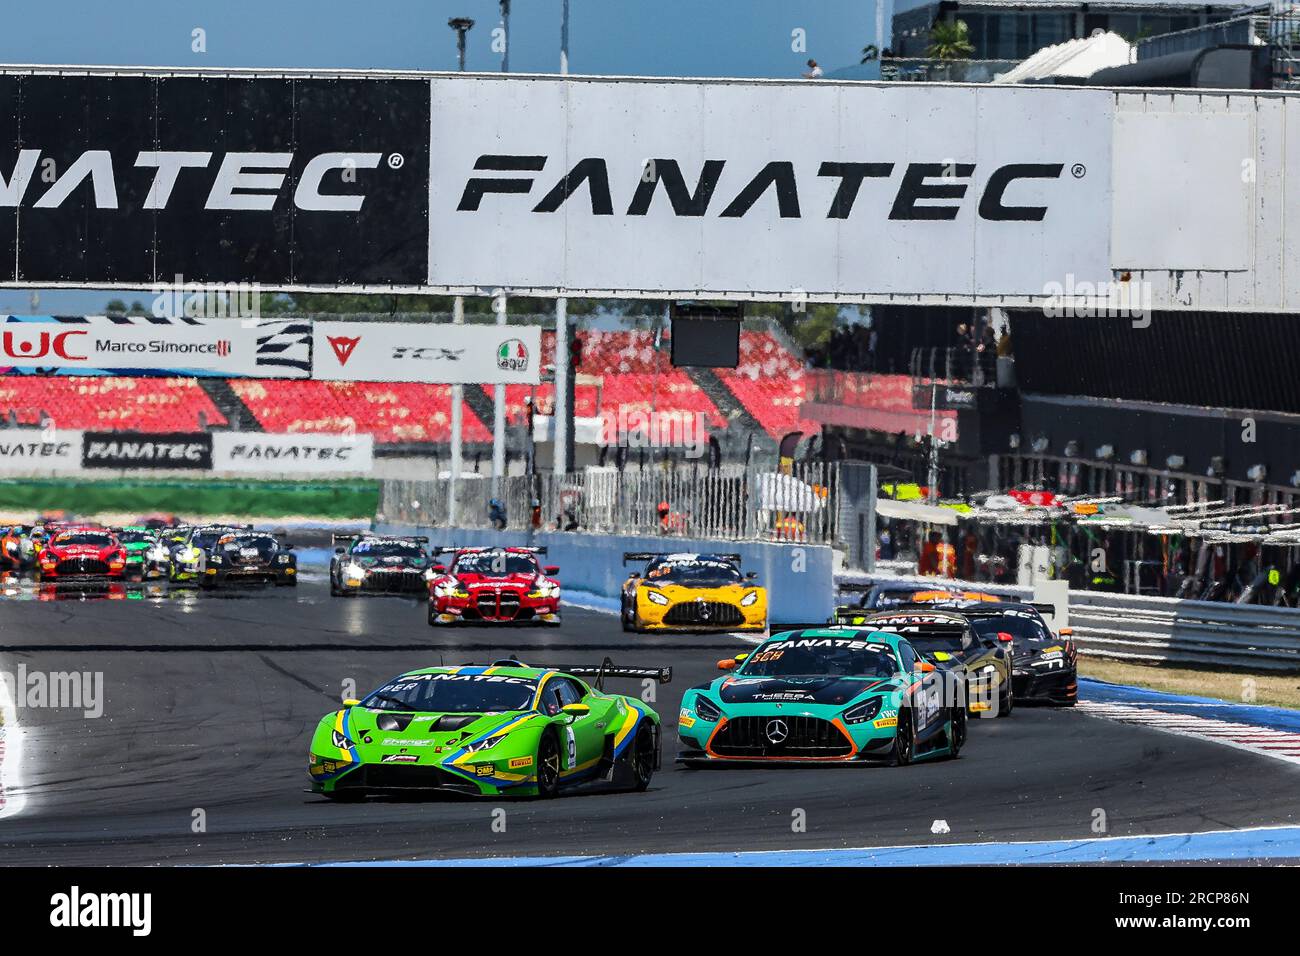 60 Franck PERERA, Jordanie POIVRE, VSRLamborghini Huracán GT3 EVO2, action during the 5th round of GT World Challenge Europe Sprint Cup 2023, at Misano, Italy from July 14 to 16, 2023 - Photo Grégory Lenormand/DPPI Credit: DPPI Media/Alamy Live News Stock Photo